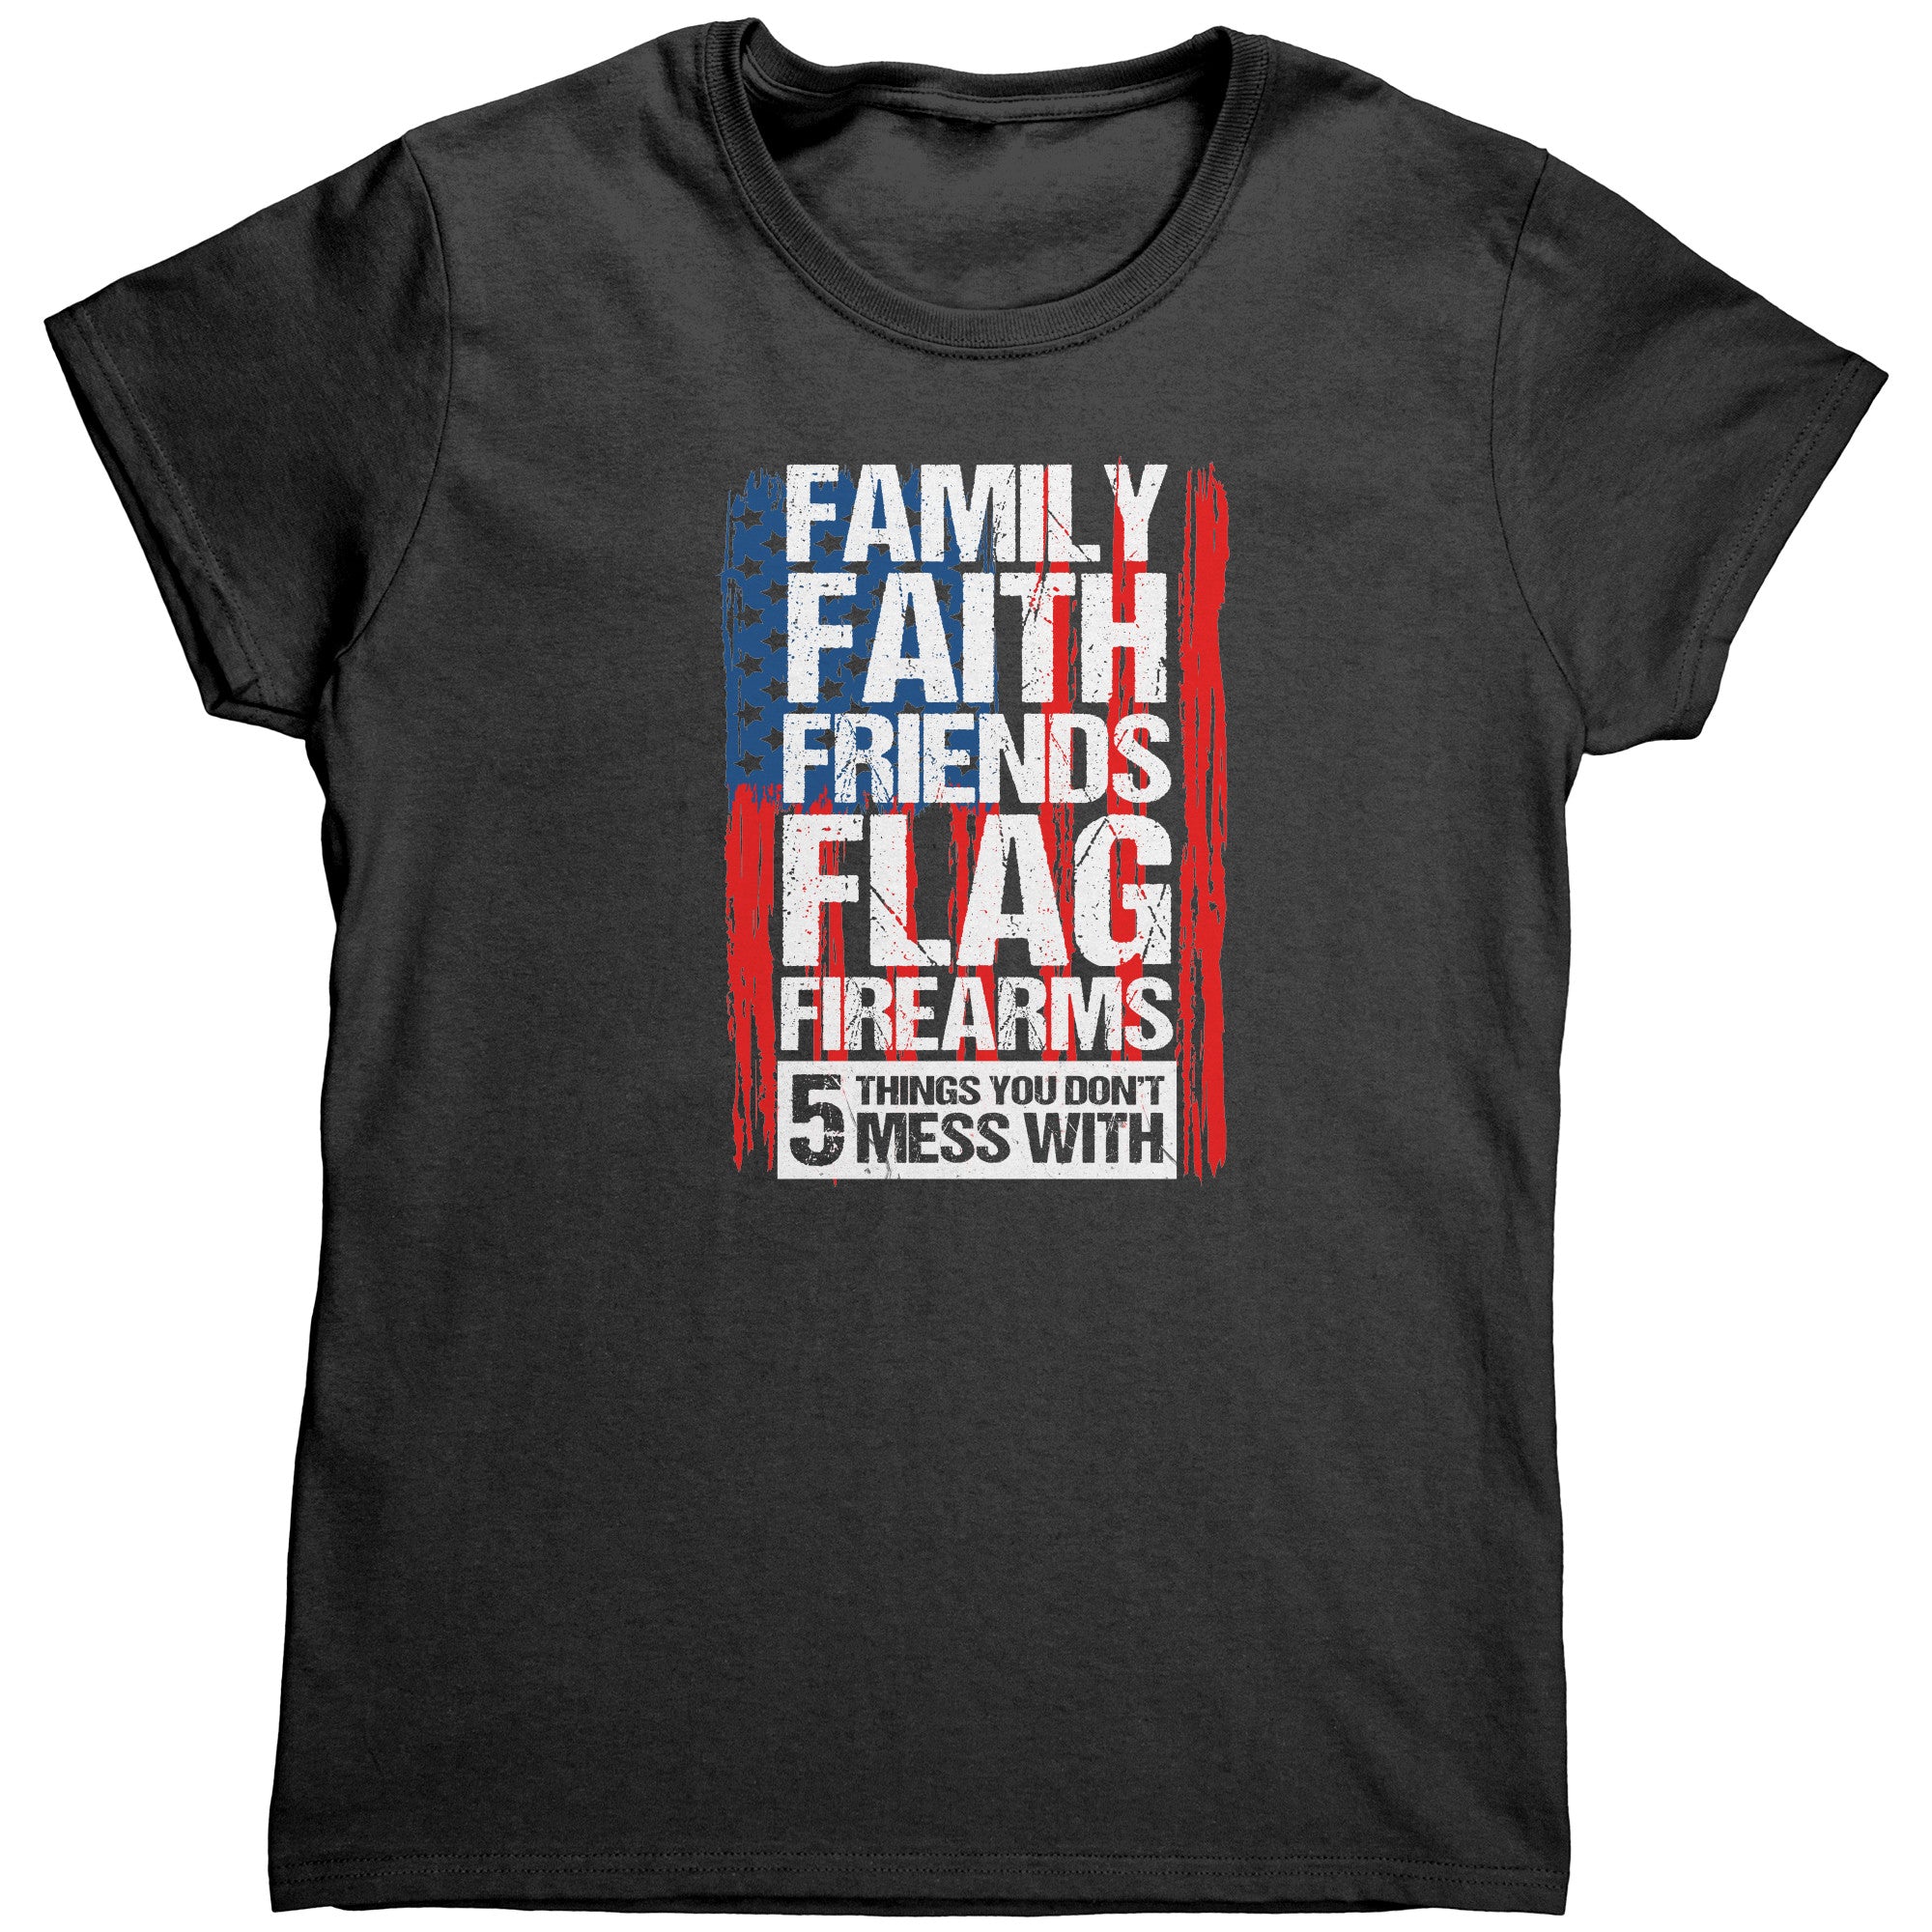 Family Faith Friends Flag Firearms 5 Things You Don't Mess With (Ladies) -Apparel | Drunk America 